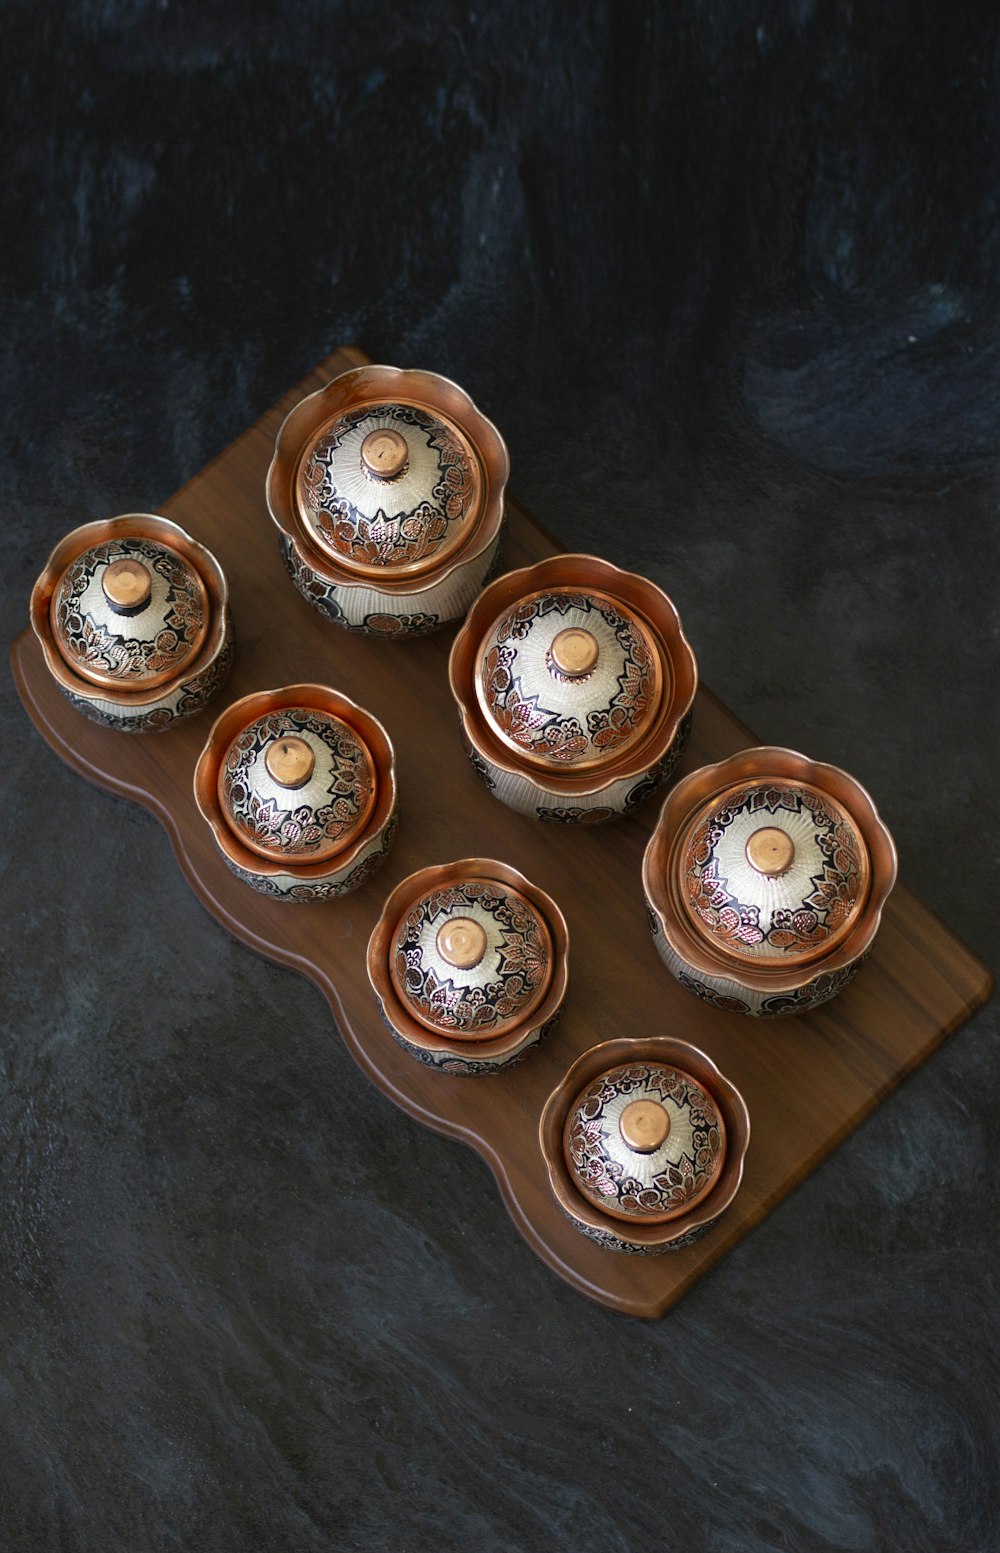 brown and white ceramic bowls on brown wooden table